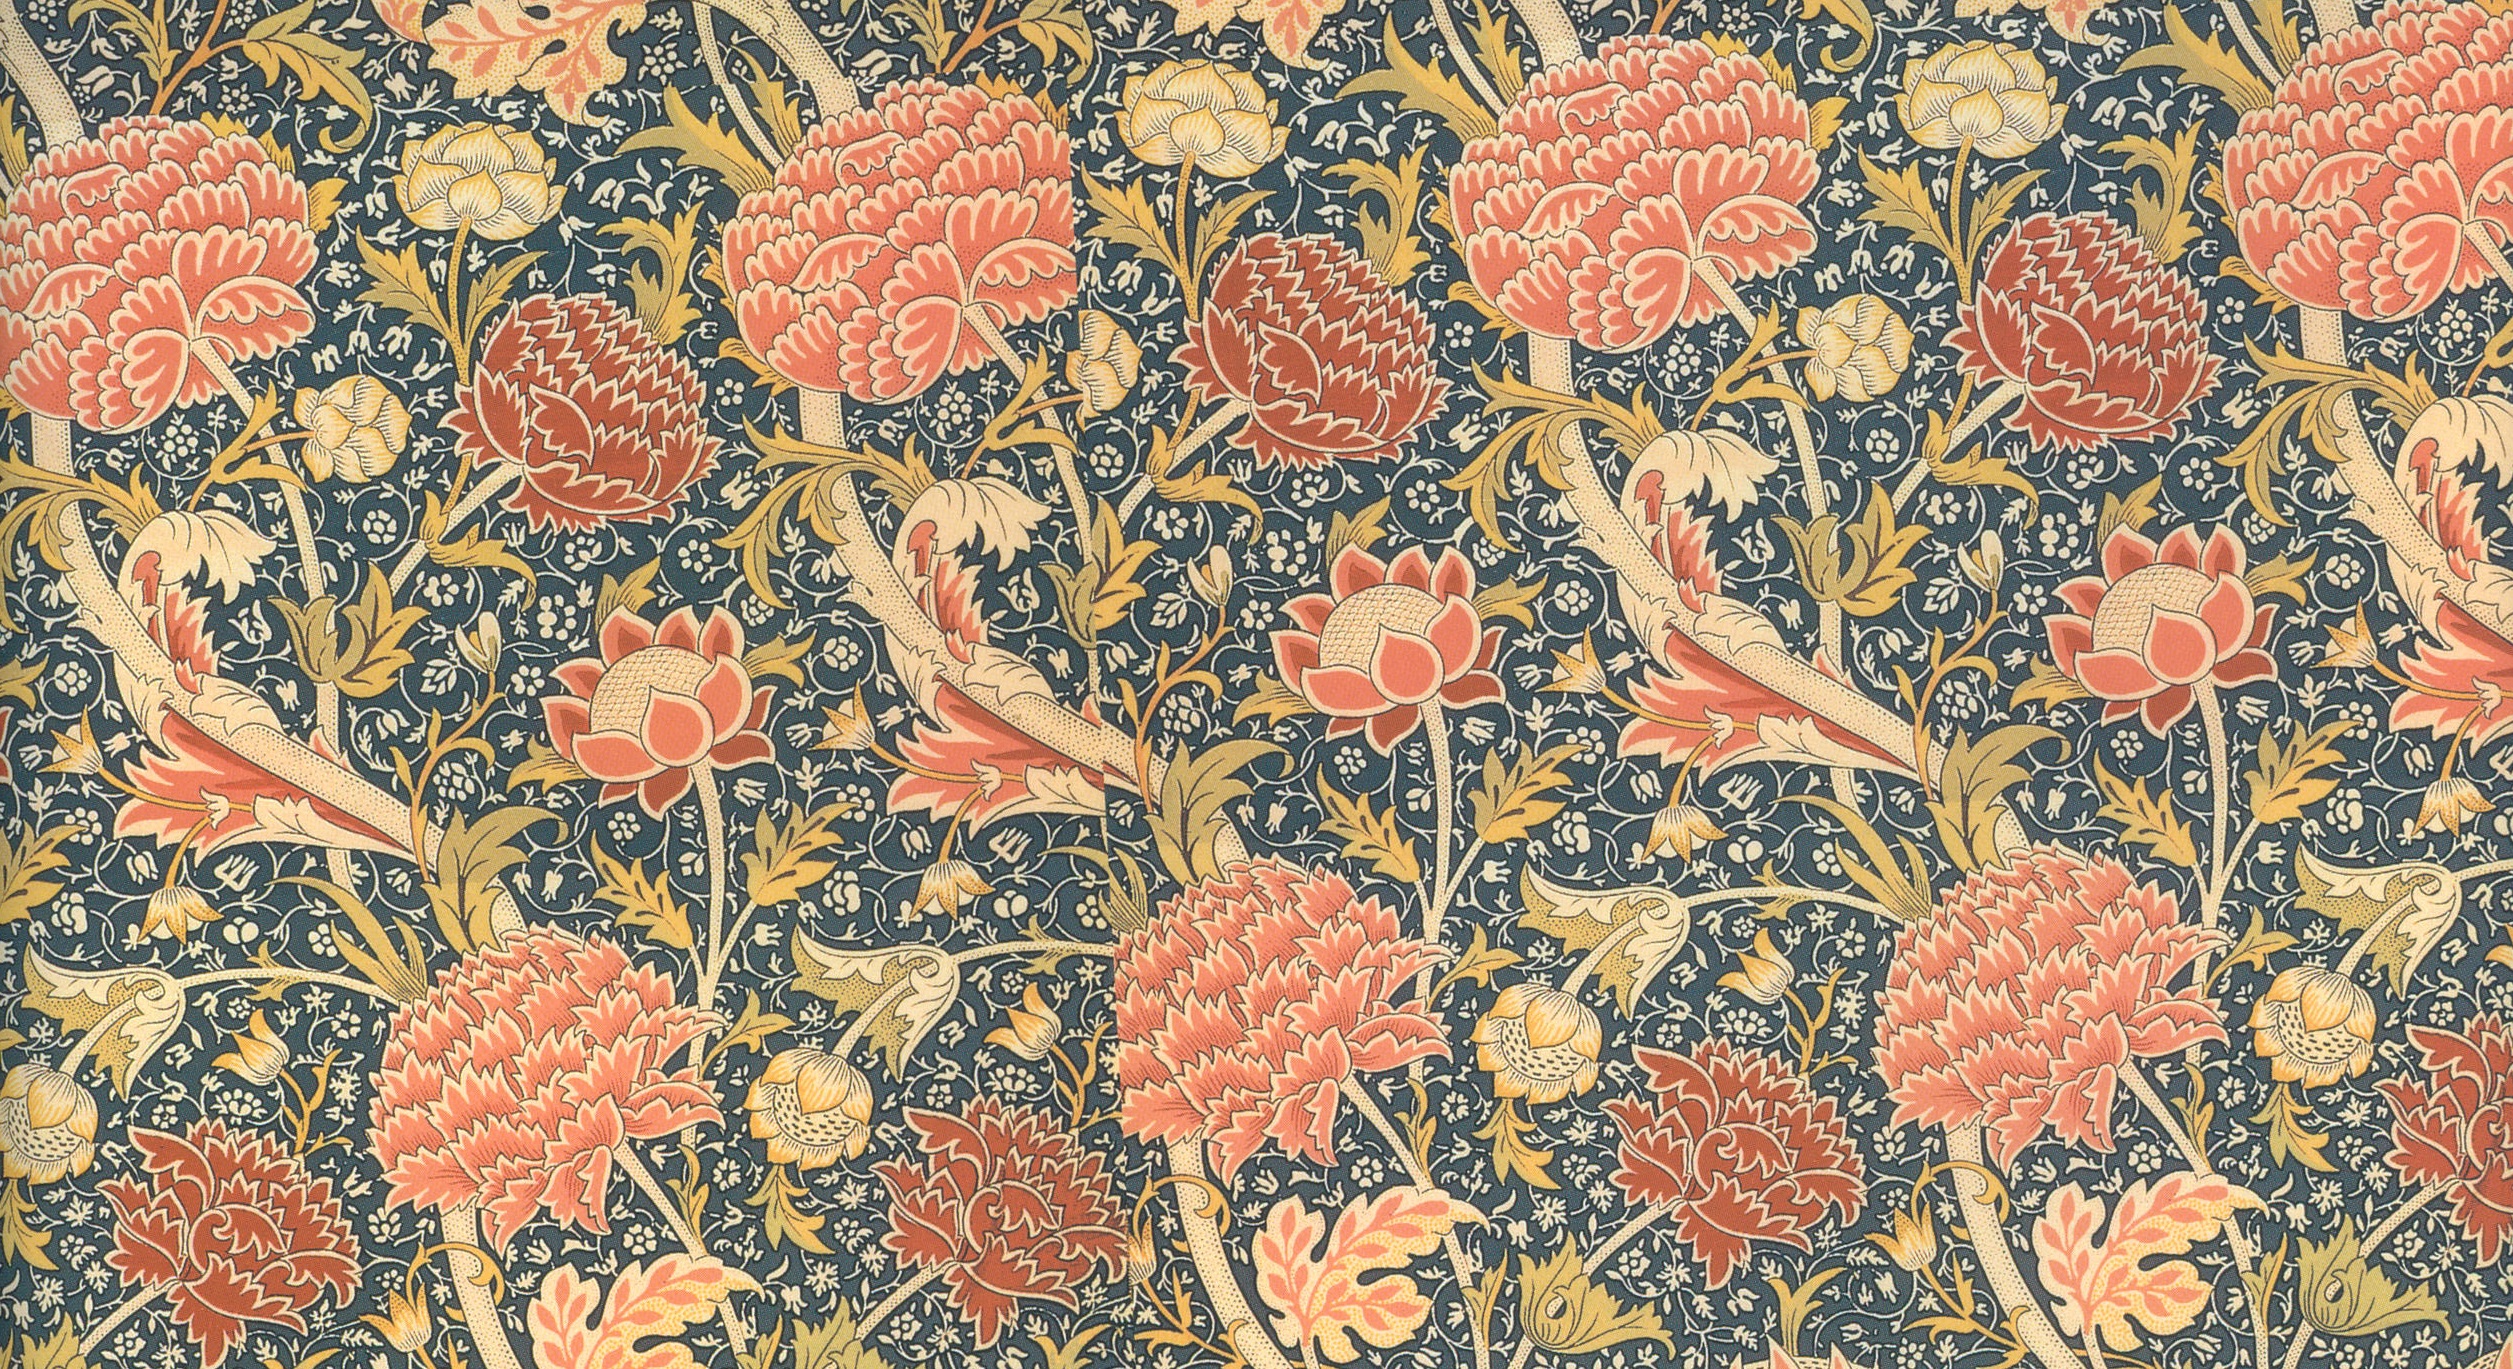 A floral textile pattern in red, pink, blue and gold